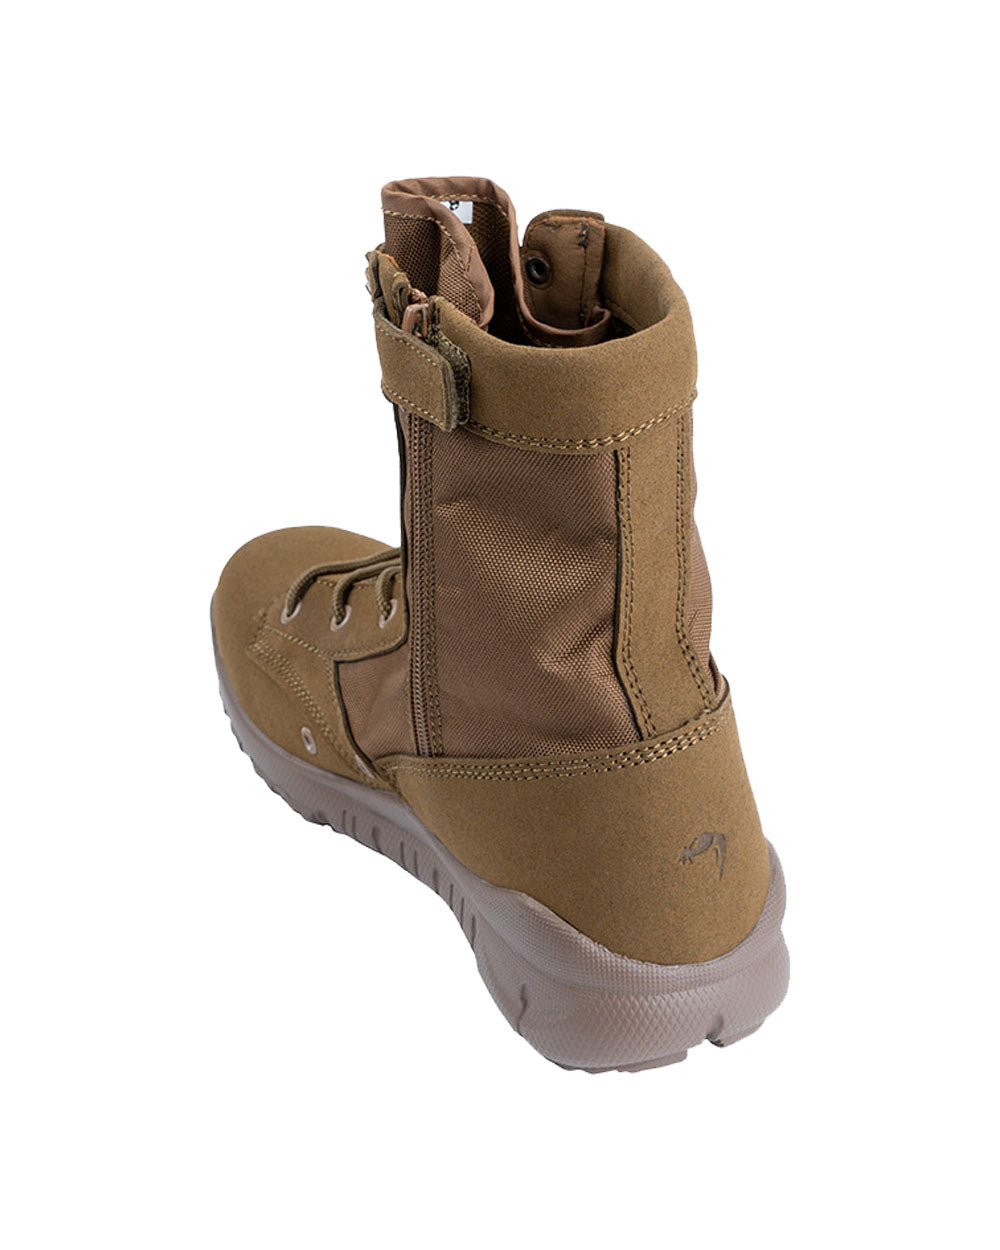 Coyote coloured Viper Sneaker Boots on White background 